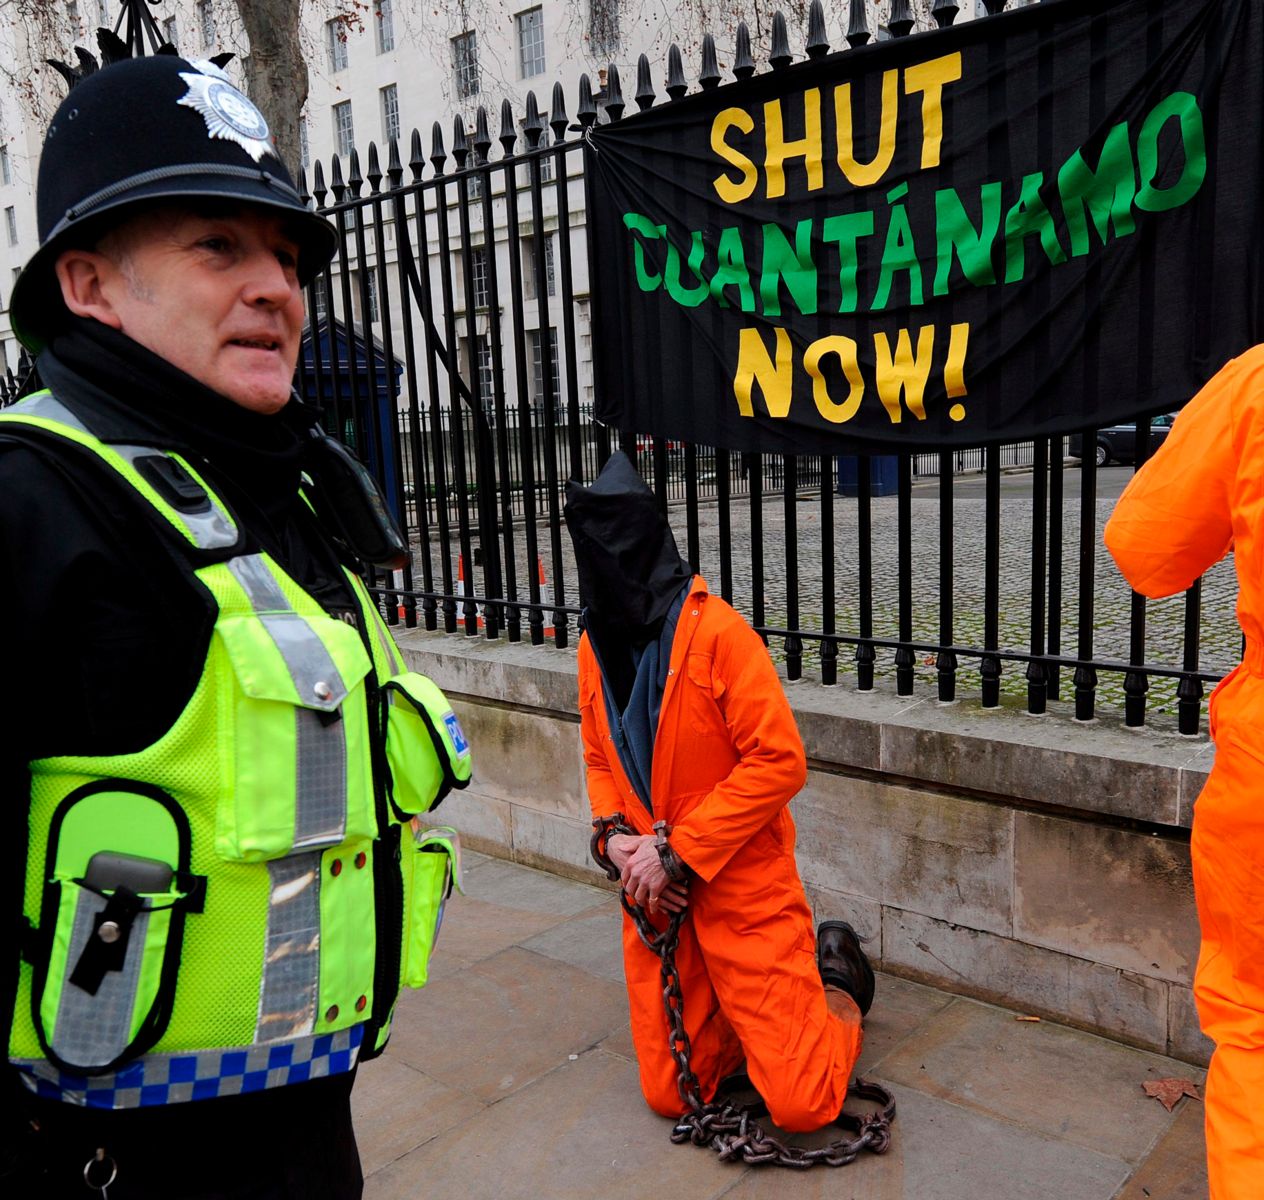 British U-turn on torture shows how human rights advocacy can work